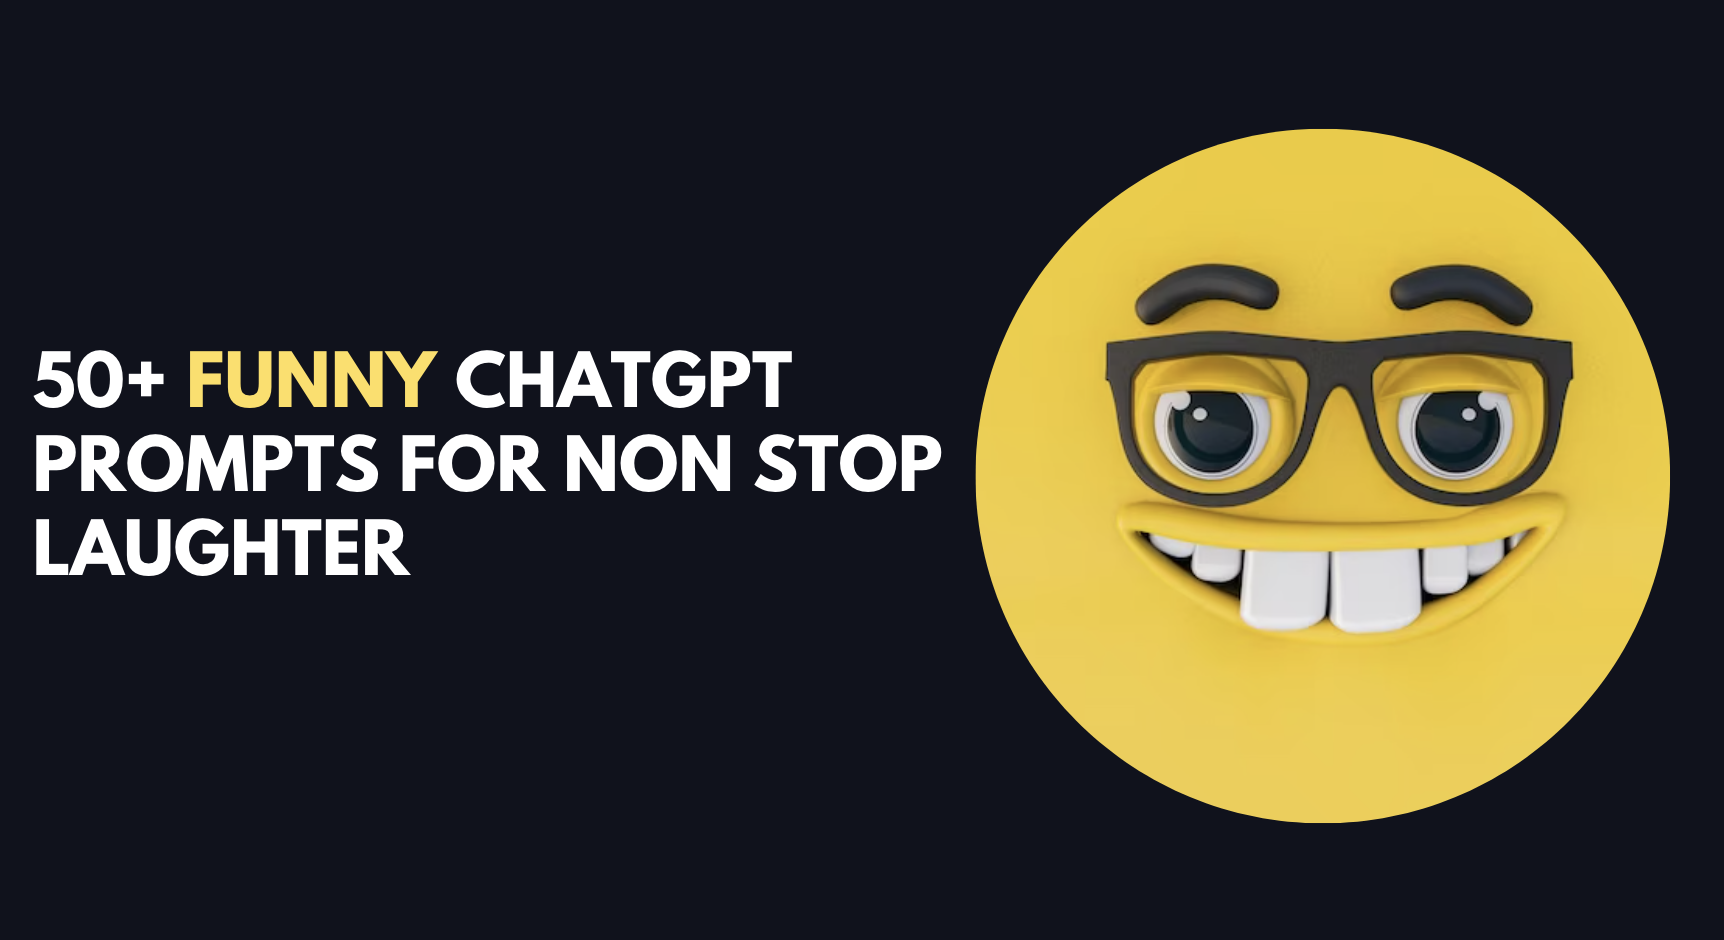 50+ Funny Chatgpt Prompts For Non Stop Laughter